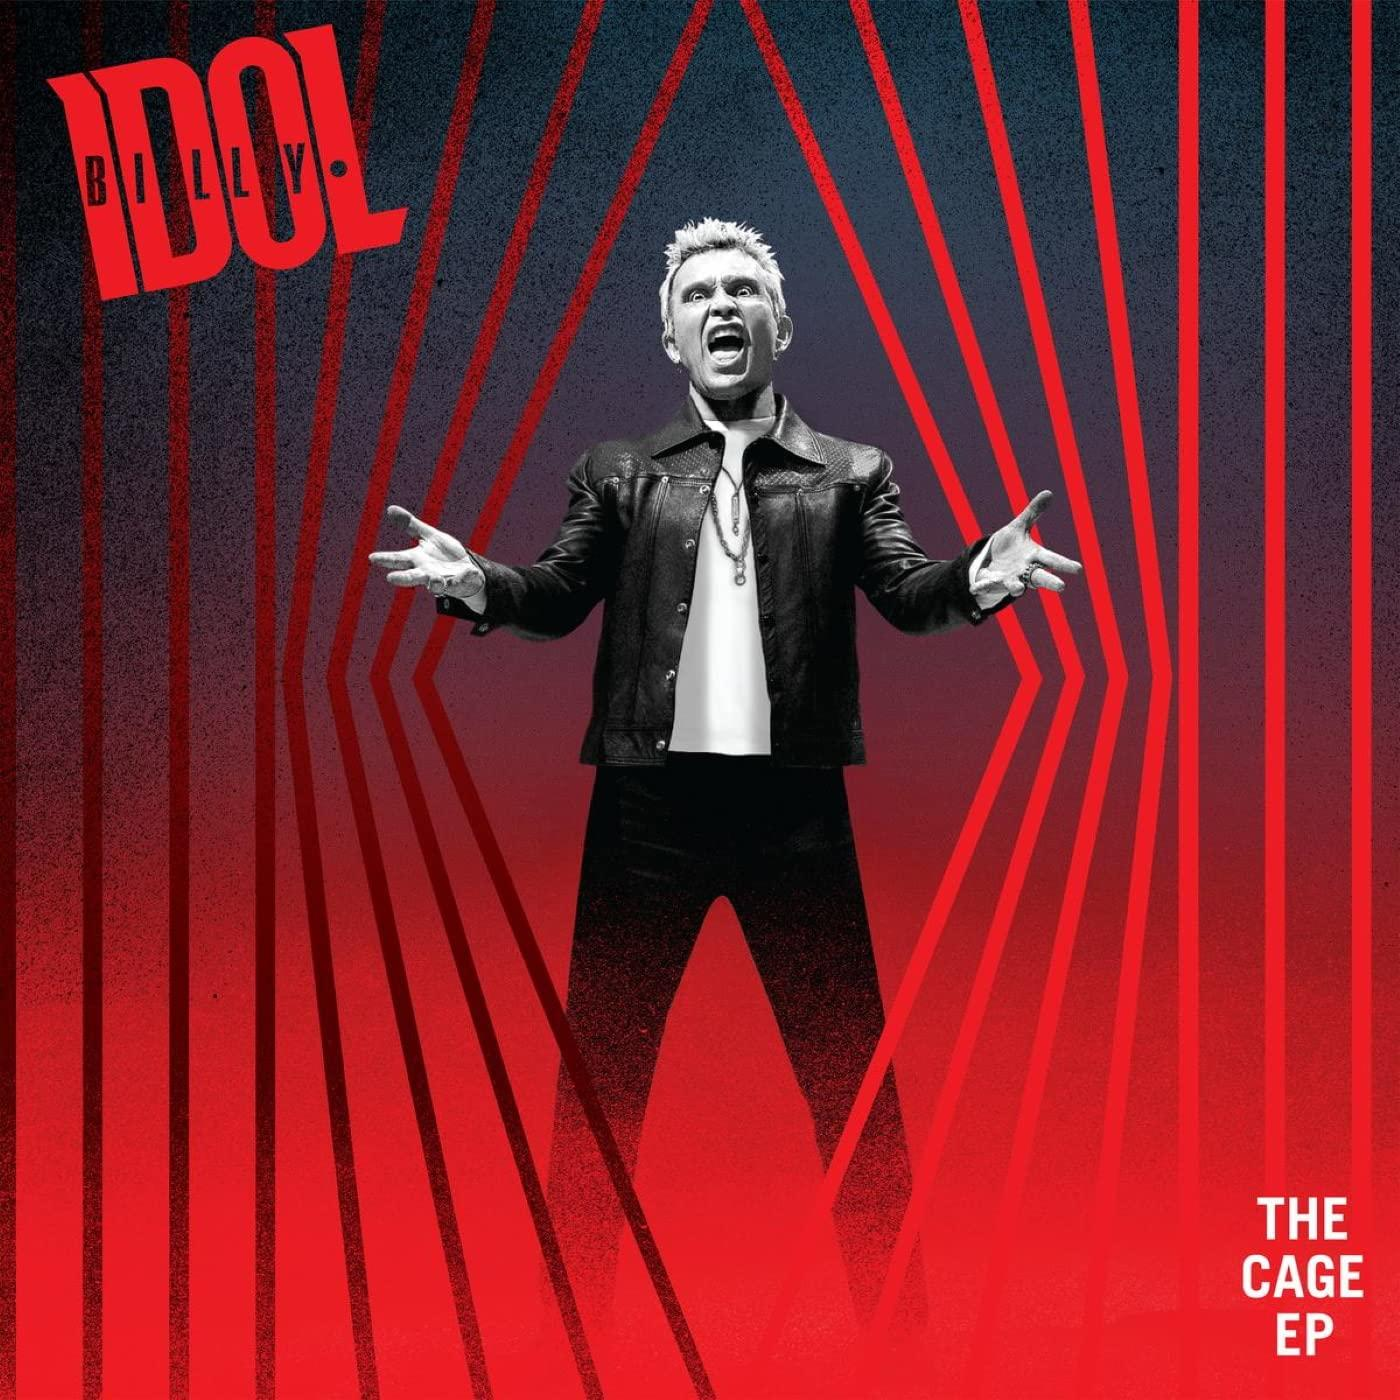 The - (CD) Billy - Idol Cage EP